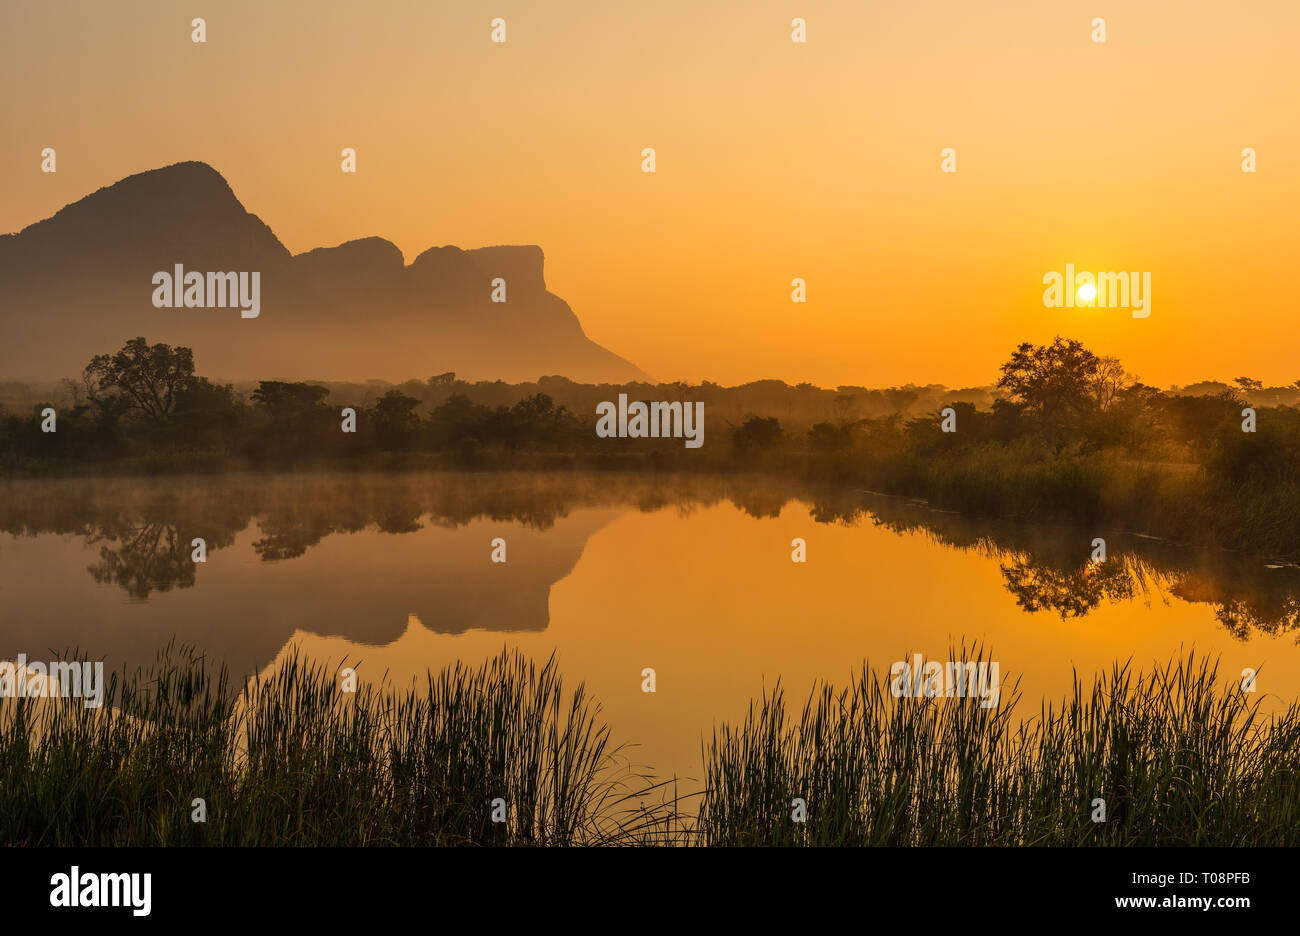 Hanging Lip or Hanglip mountain peak at sunrise in the mist and fog by a swamp lake, Entabeni Safari Game Reserve, Limpopo Province, South Africa. Stock Photo